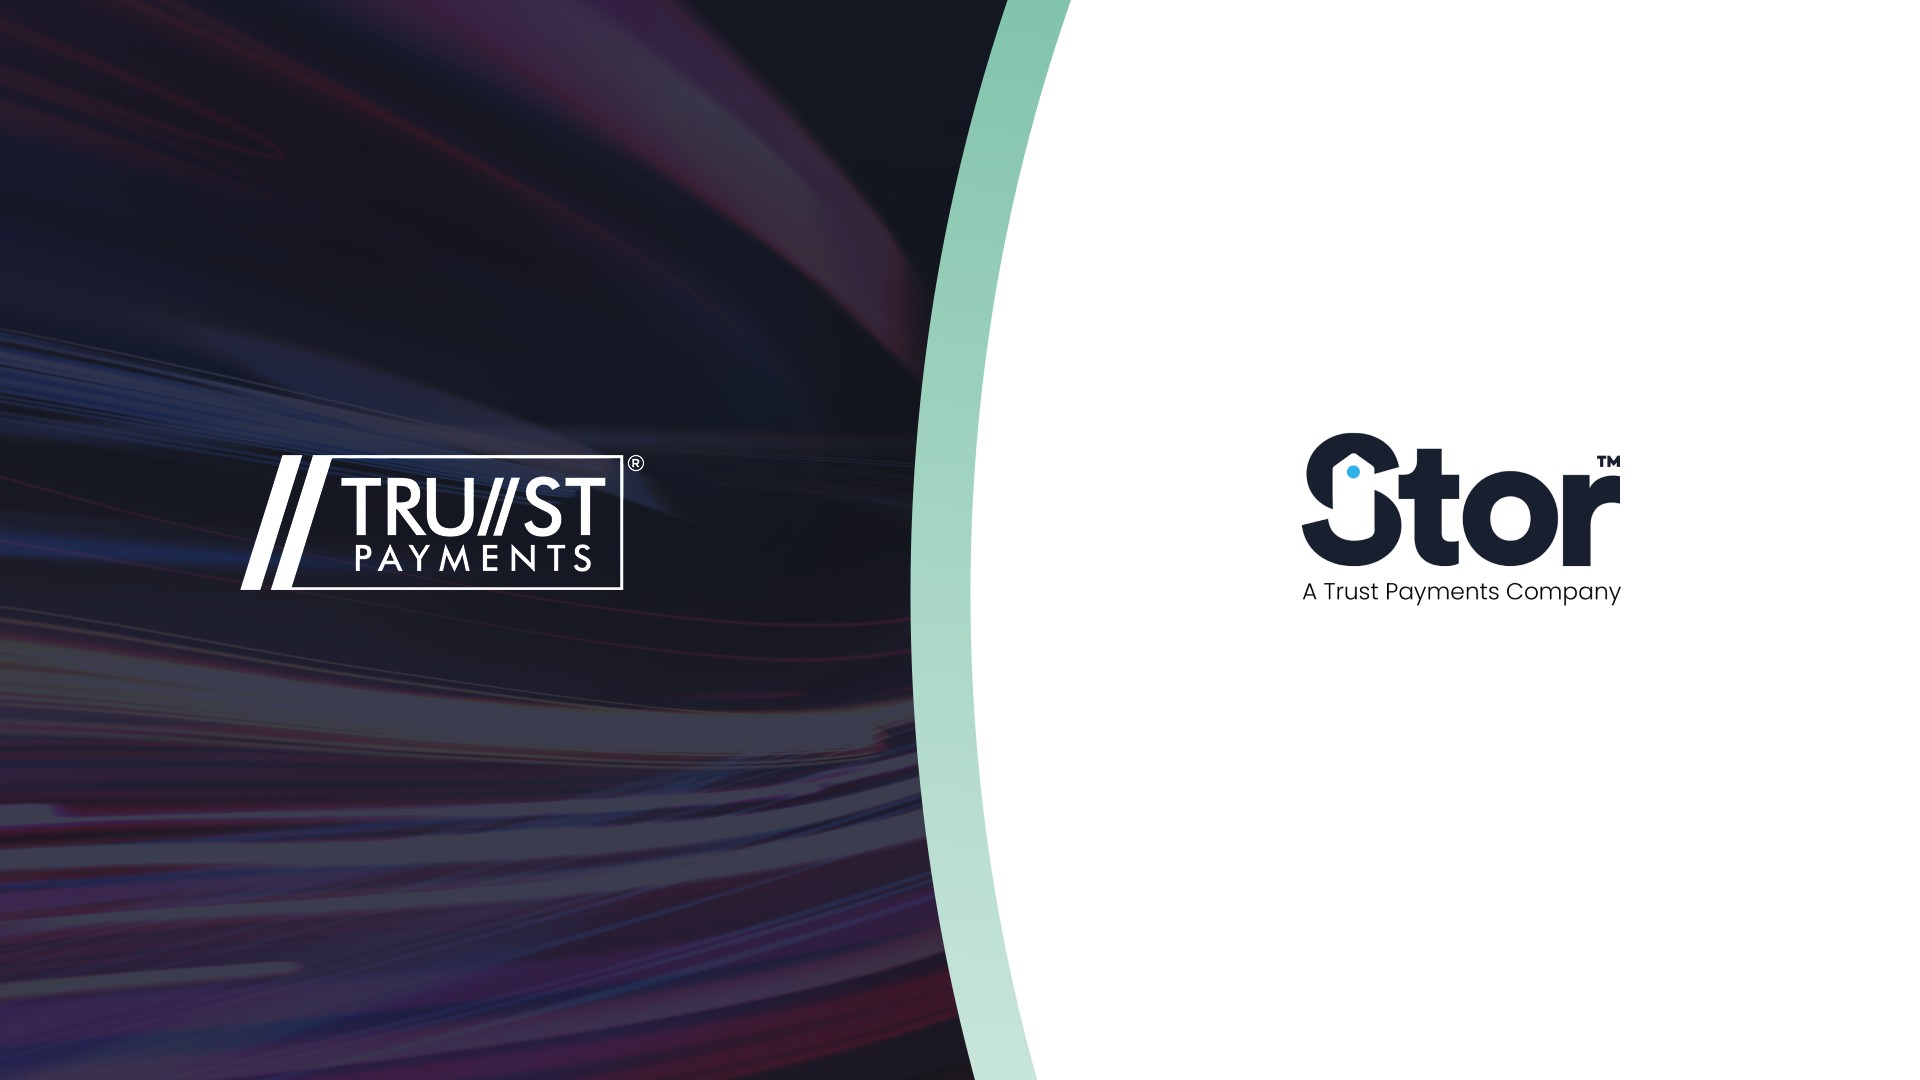 Trust Payments launches Stor e-commerce platform in the US distributed by third-party partner ISOs